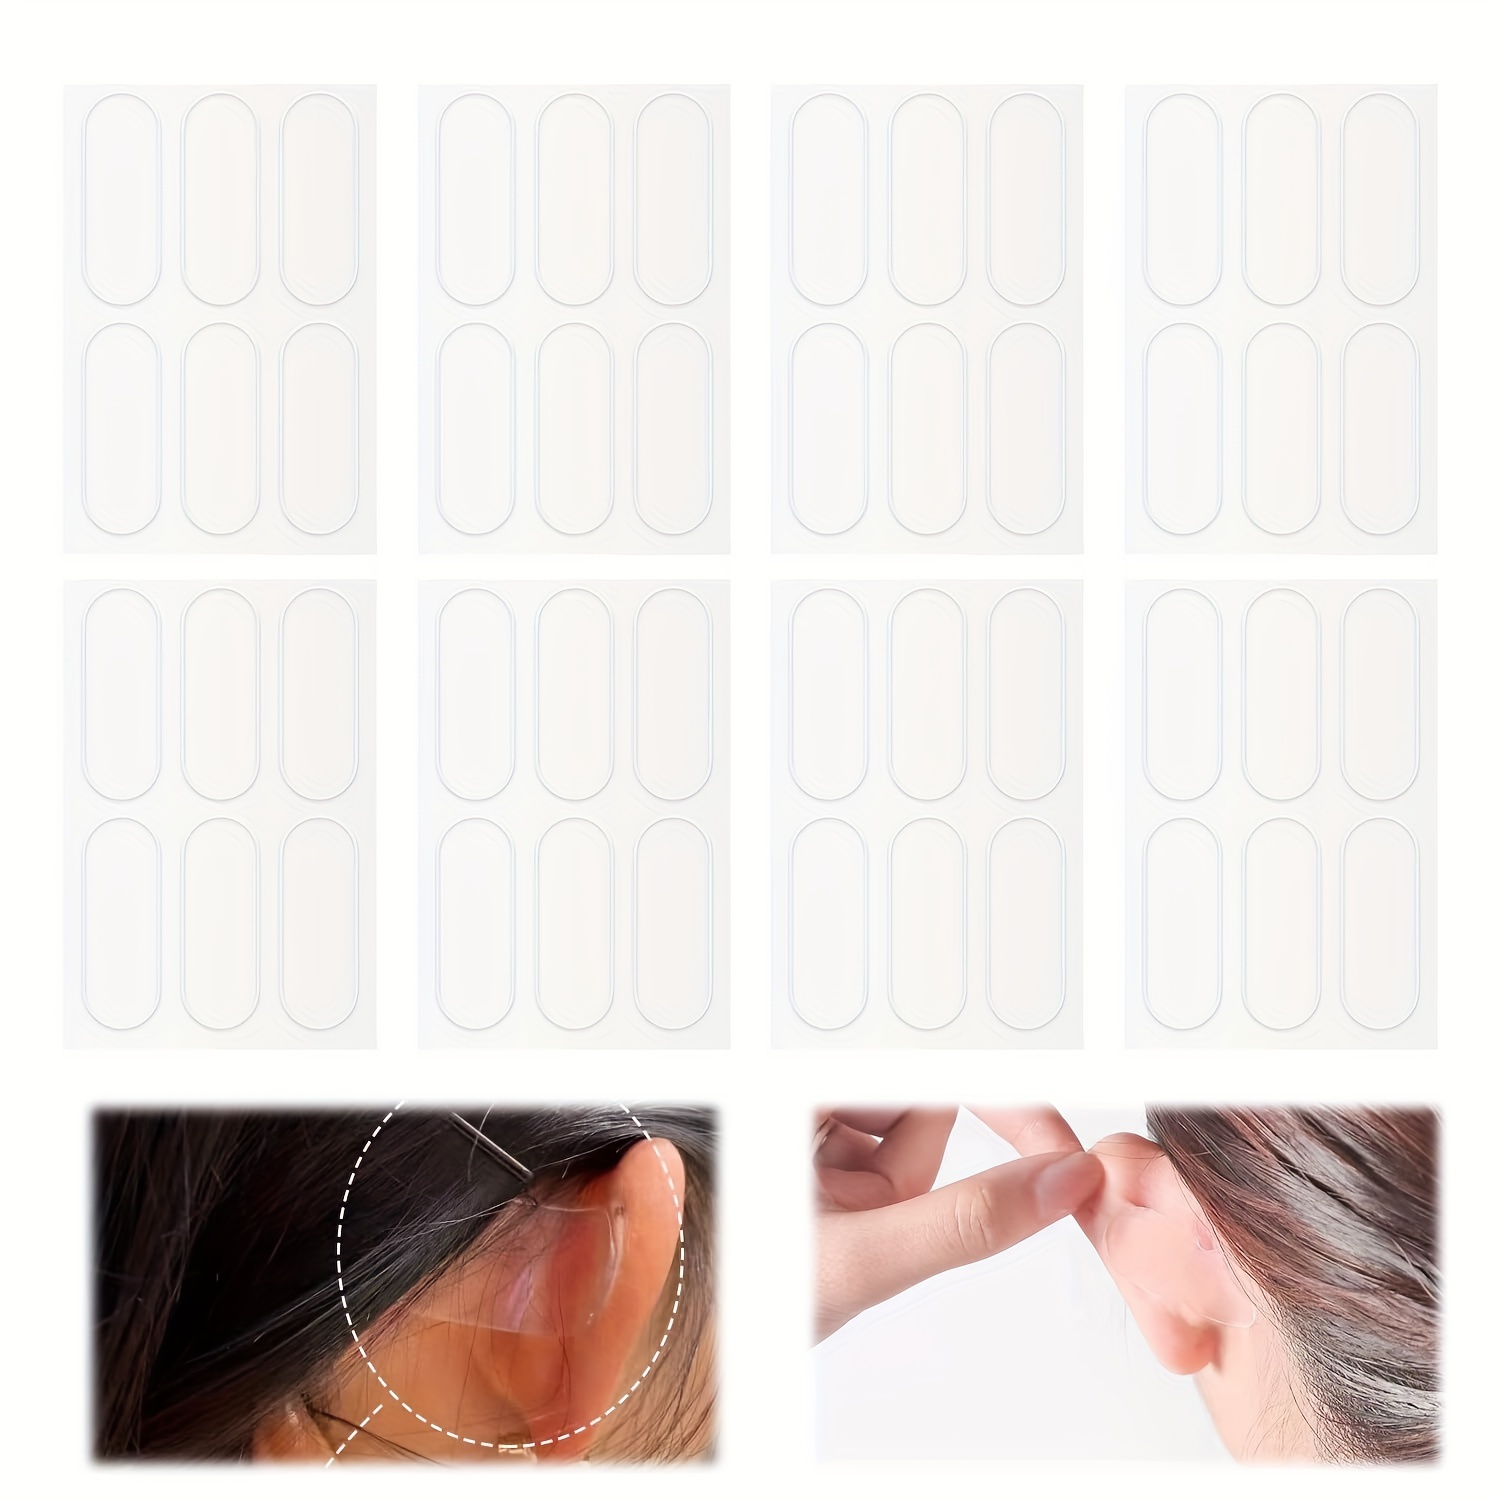 

48 Pcs Elf Ear Shaping Tape, Invisible Ear Lift Patches, Easy-to-wear Adhesive For Small Ears, Enhancing Cosplay & Costumes, Comfortable & Secure Fit Elf Ears Props